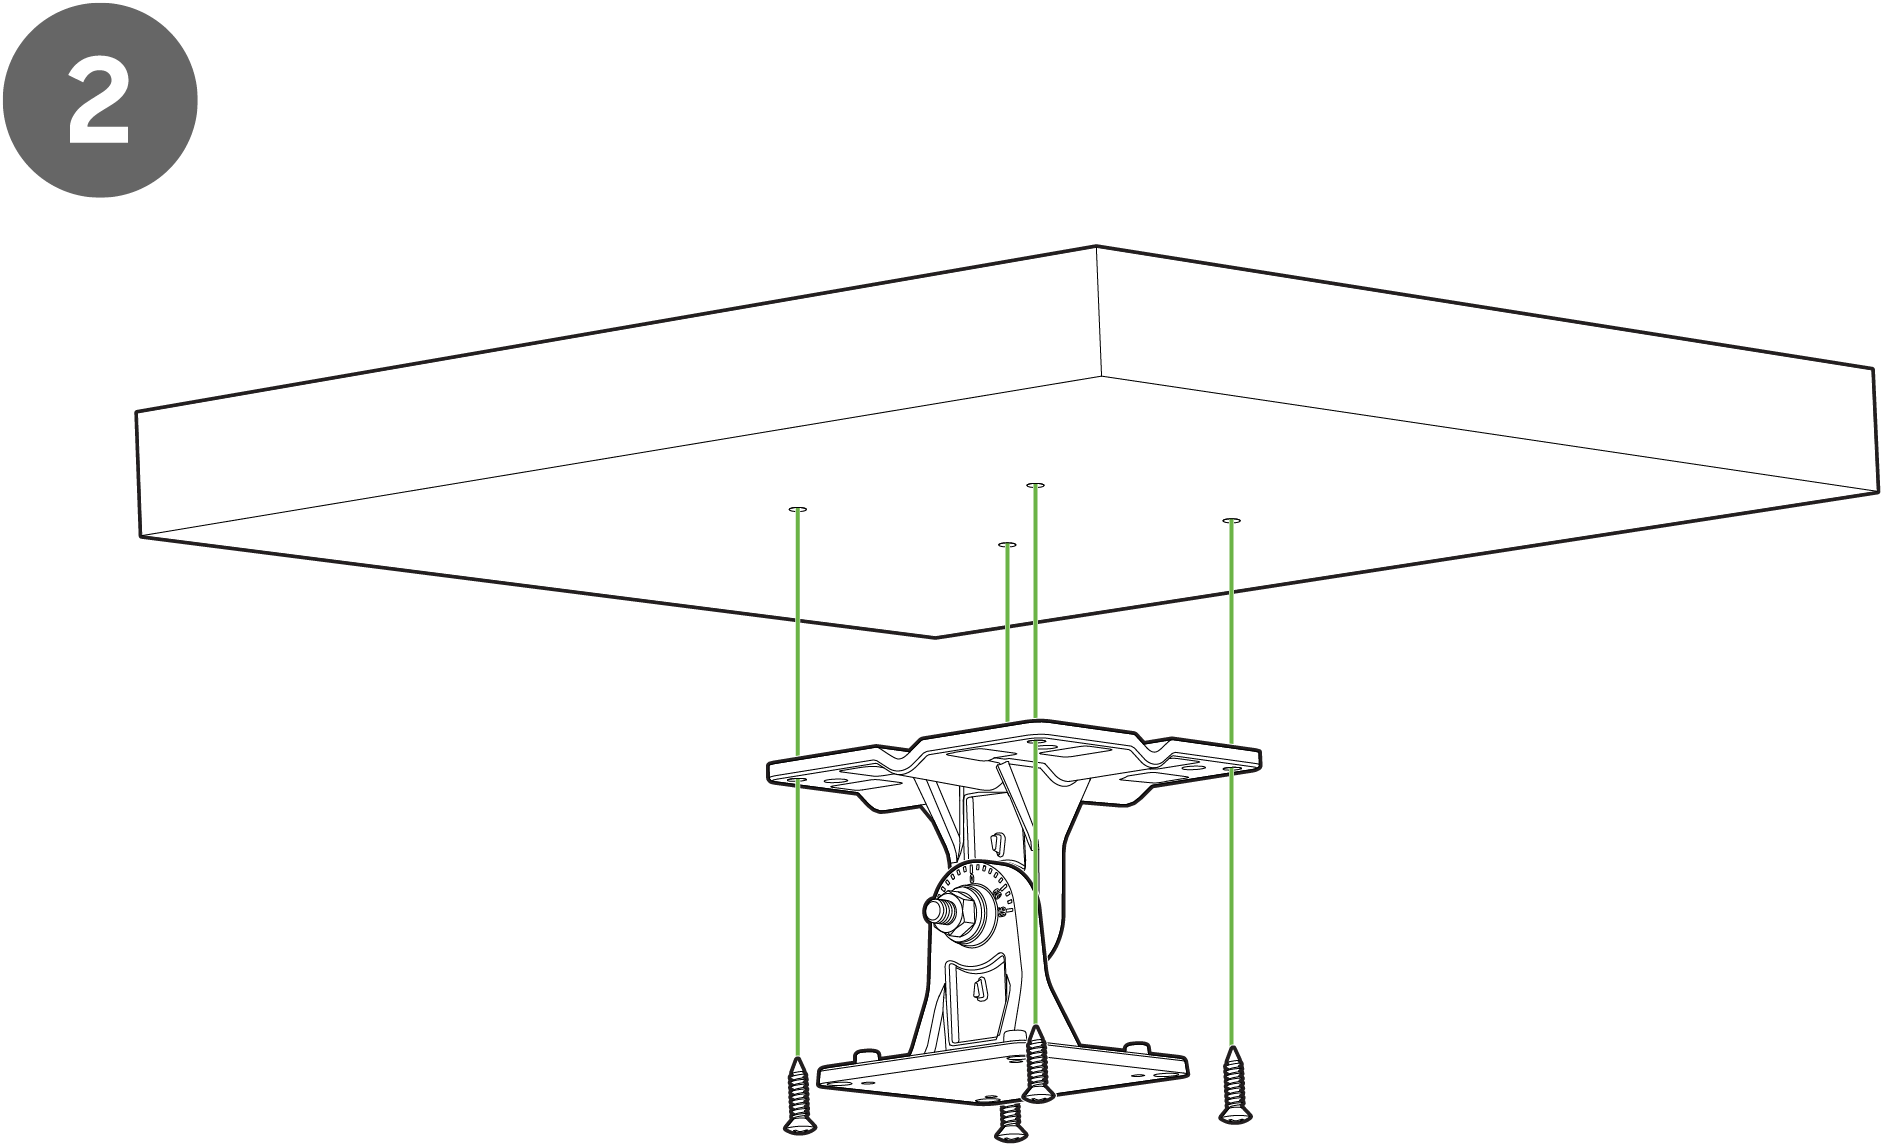  Image showing attachment of the mounting flange to the ceiling using four M6 screws through the holes in the bracket